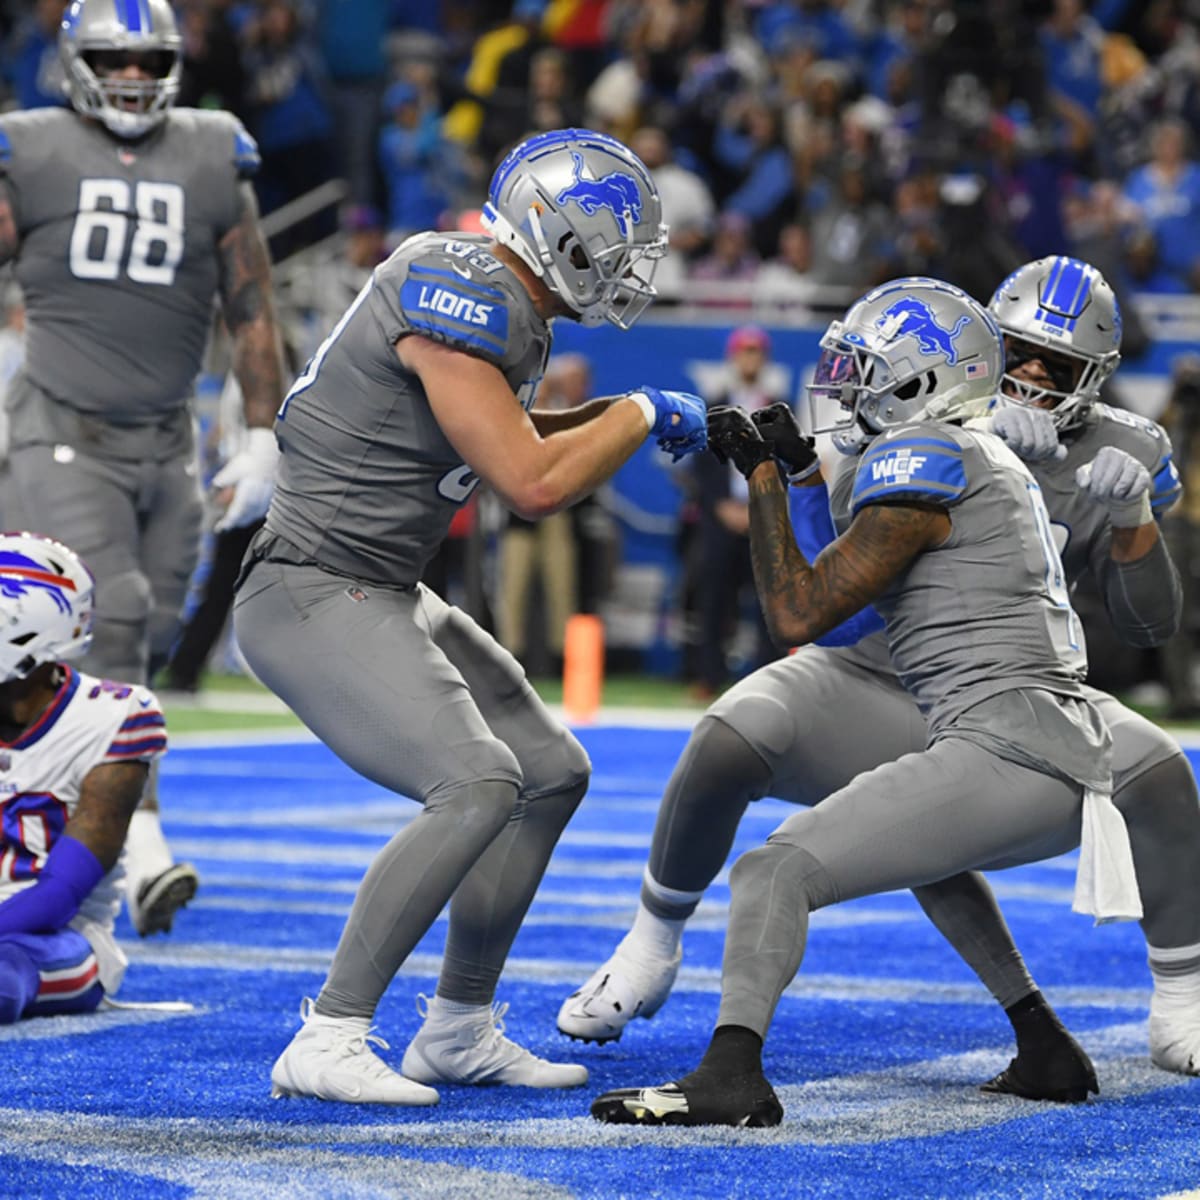 Hop on the Lions bandwagon with new gear after Detroit upsets